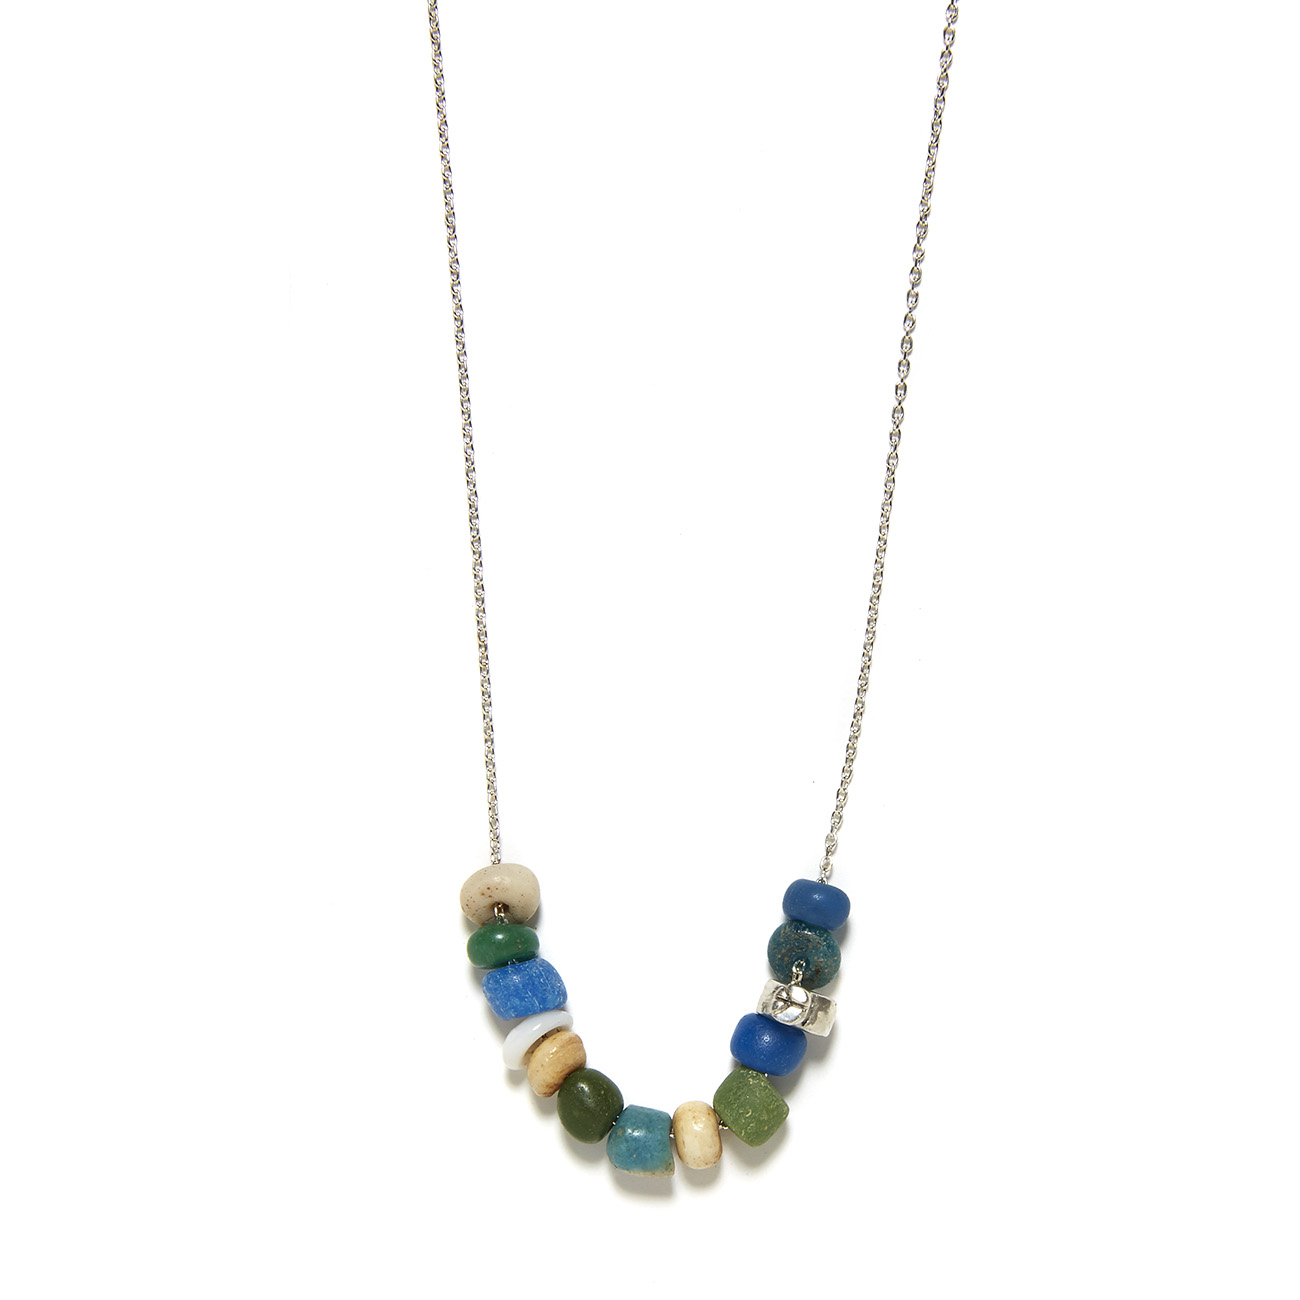 Elisa Solomon - Sterling Silver Peace Bead Necklace With Beads